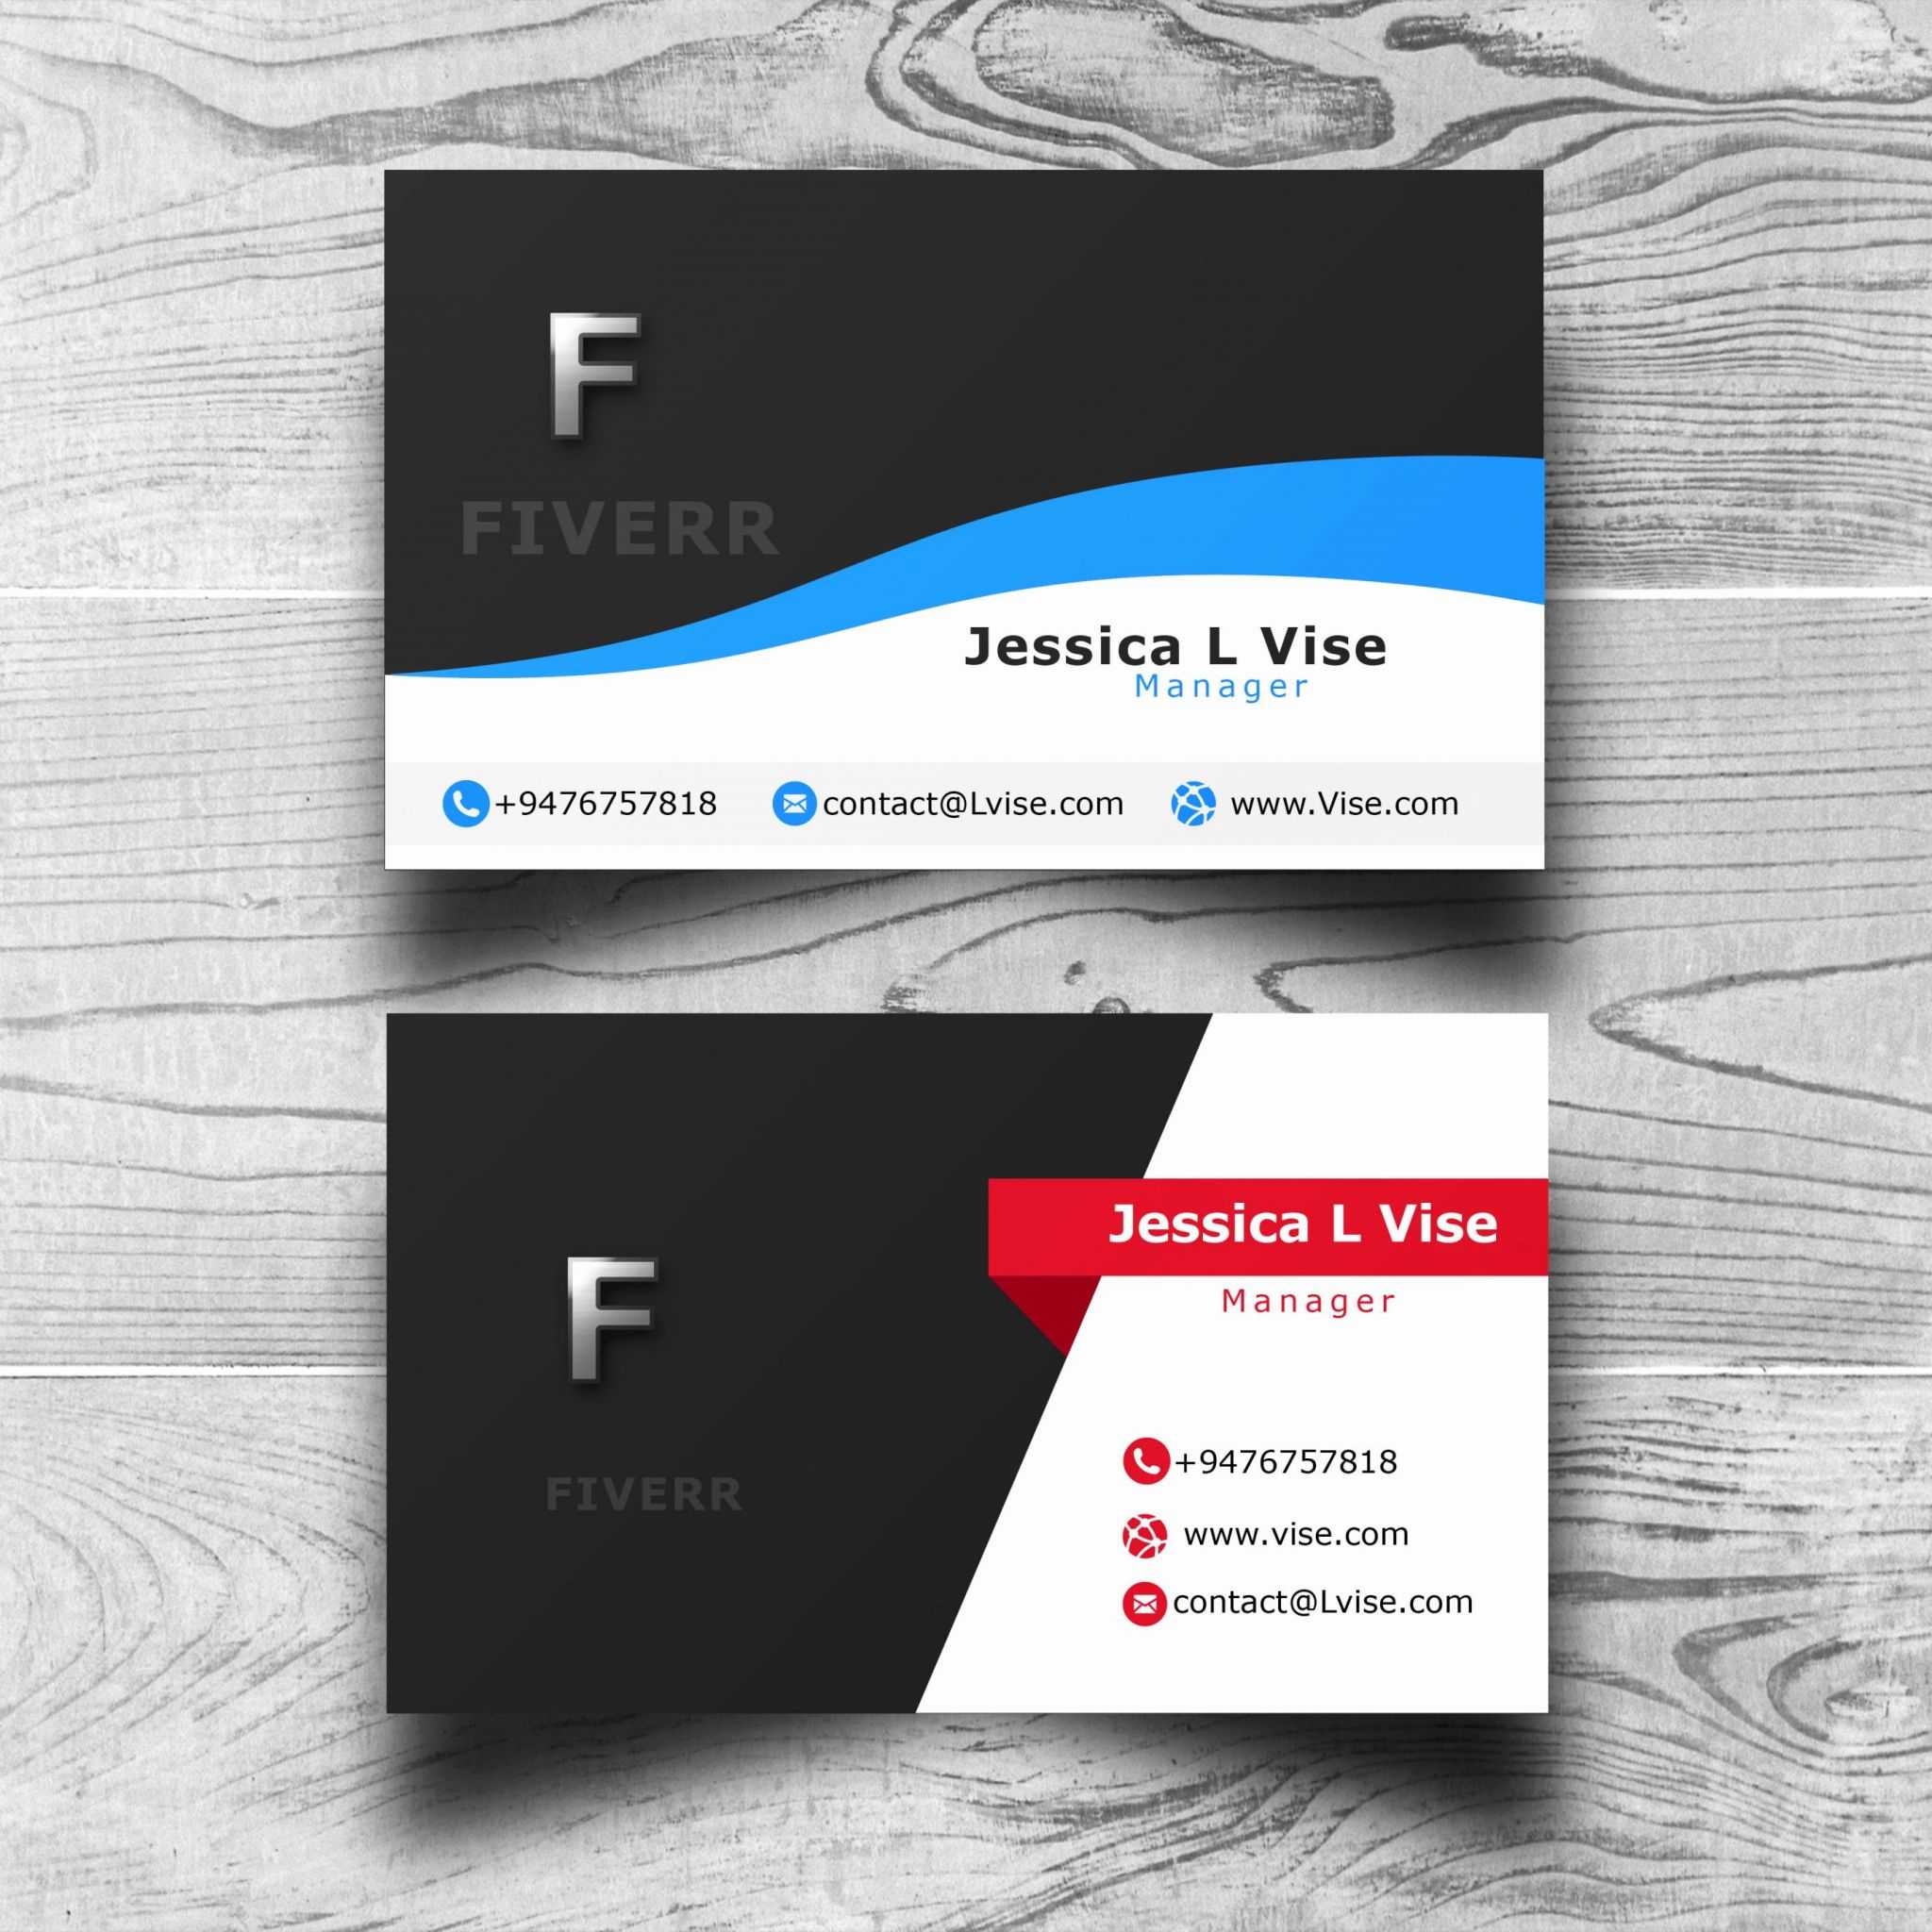 Double Sided Business Card Template Illustrator | Lera Mera With Double Sided Business Card Template Illustrator